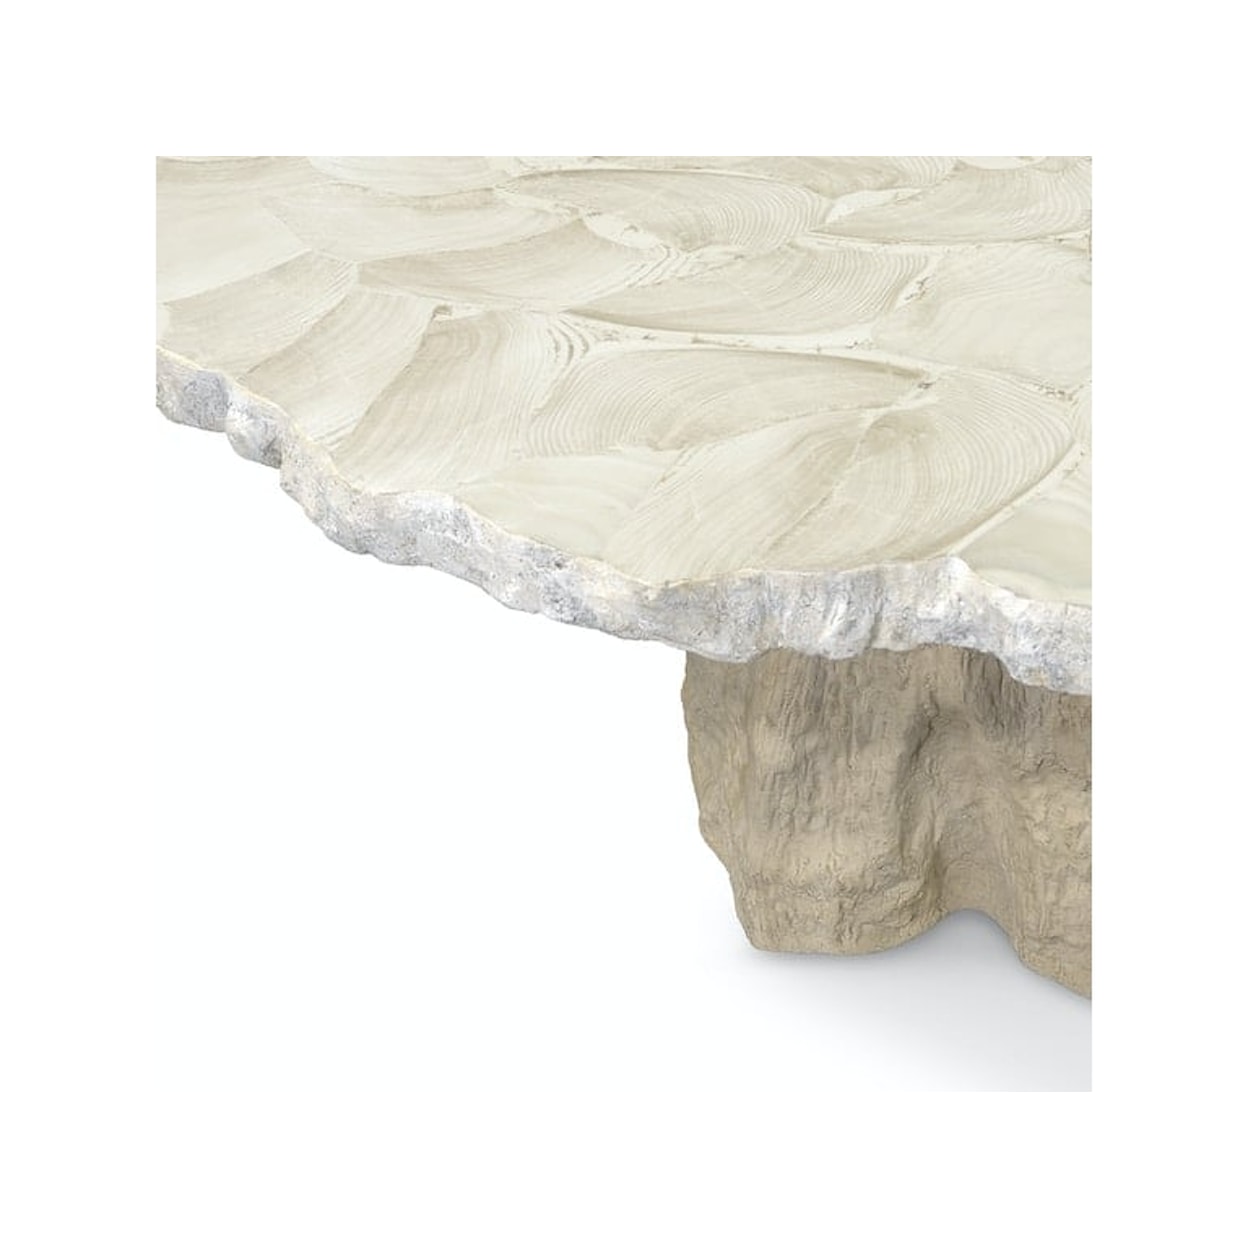 Palecek Camilla Camilla Fossilized Clam Round Dining Table